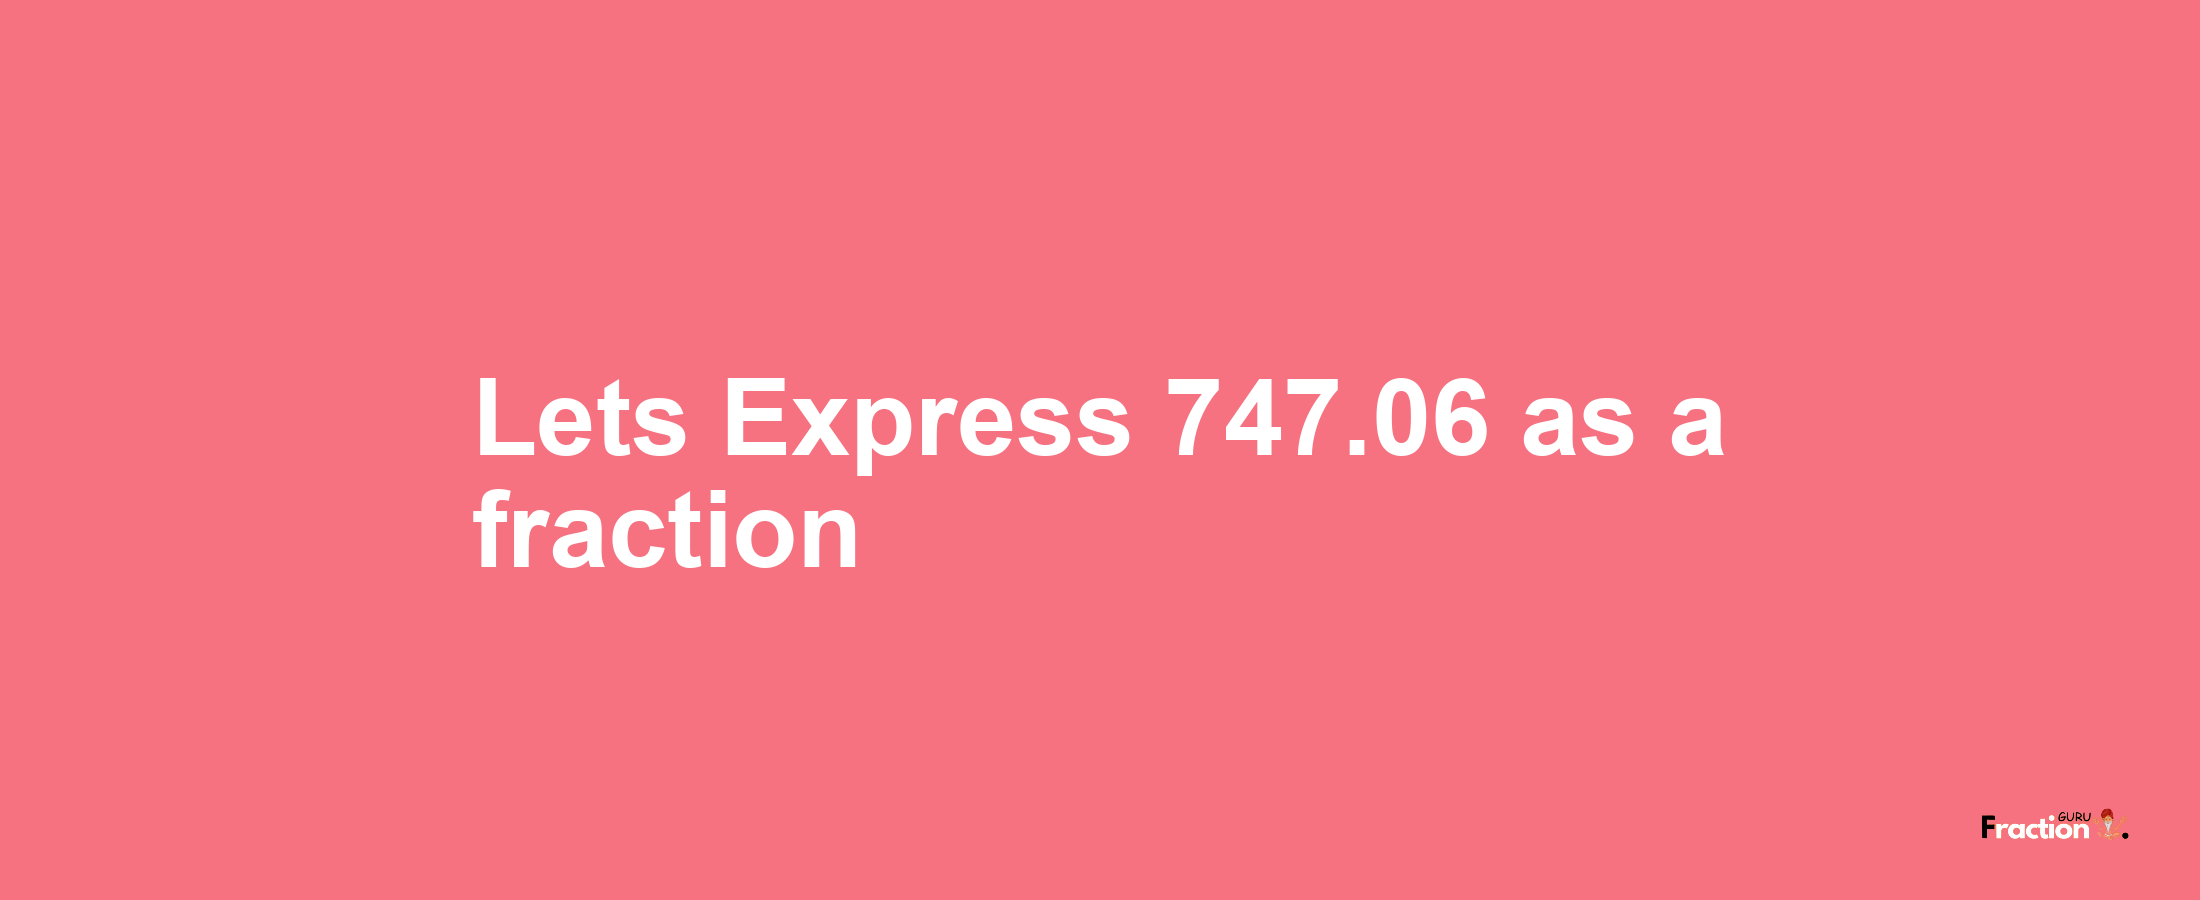 Lets Express 747.06 as afraction